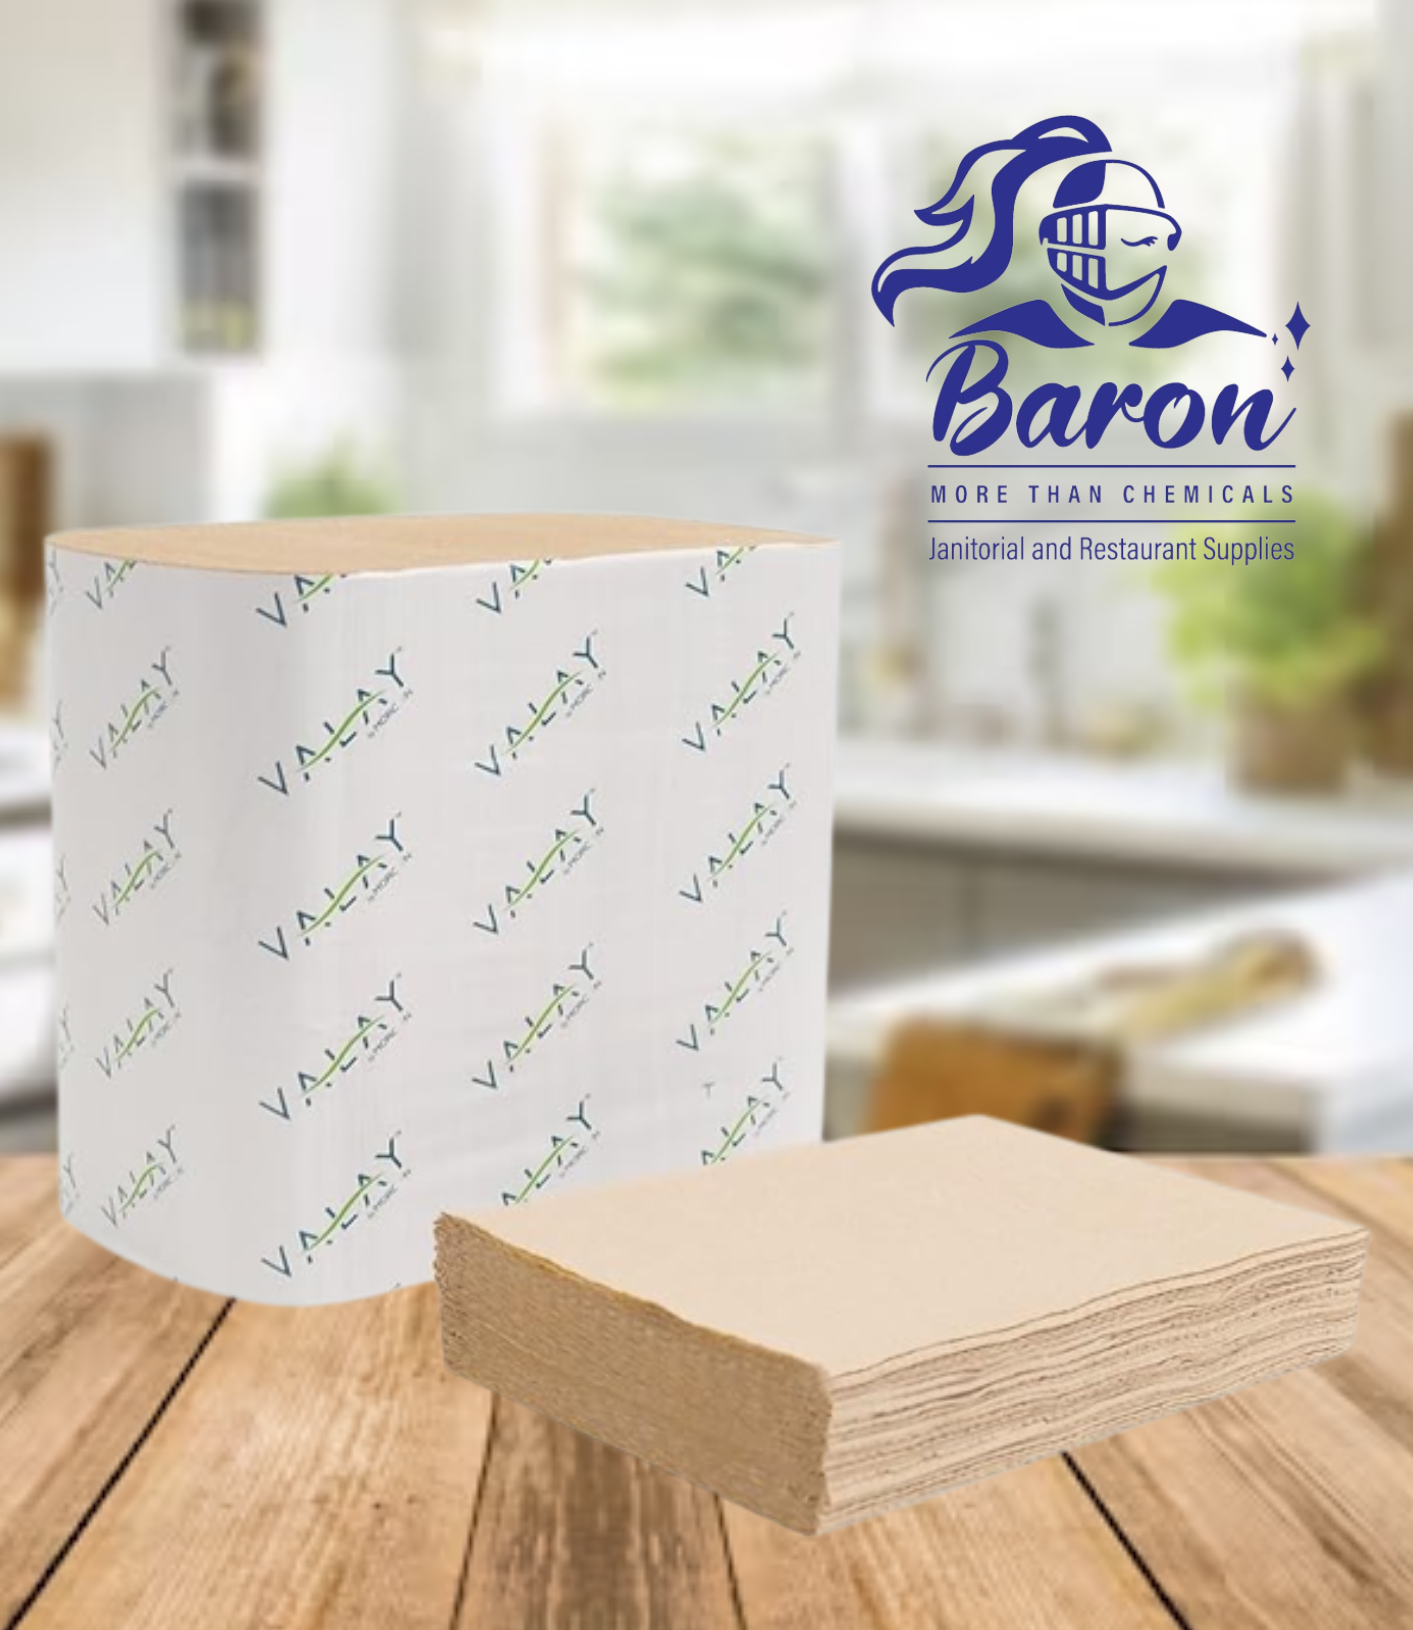 5300VN Morcon Valay Interfolded Napkin - Baron Chemicals